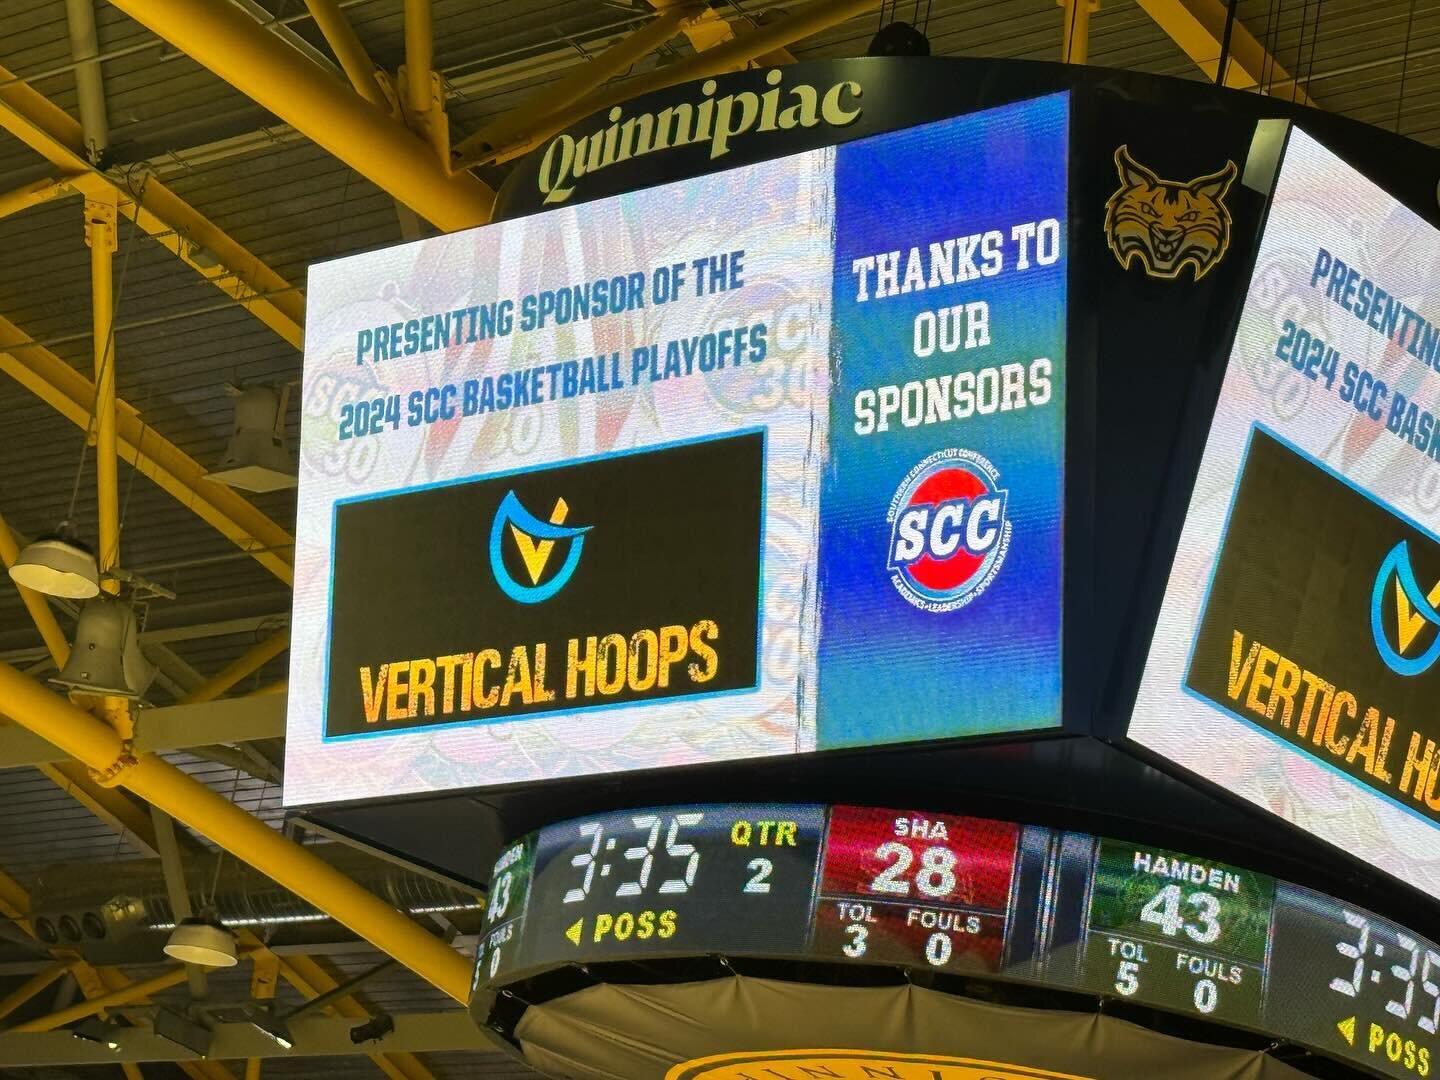 Proud sponsor of the @scccommissioner tournament. Great to support so many of the athletes in the SCC who have competed in Vertical Hoops events over the years.